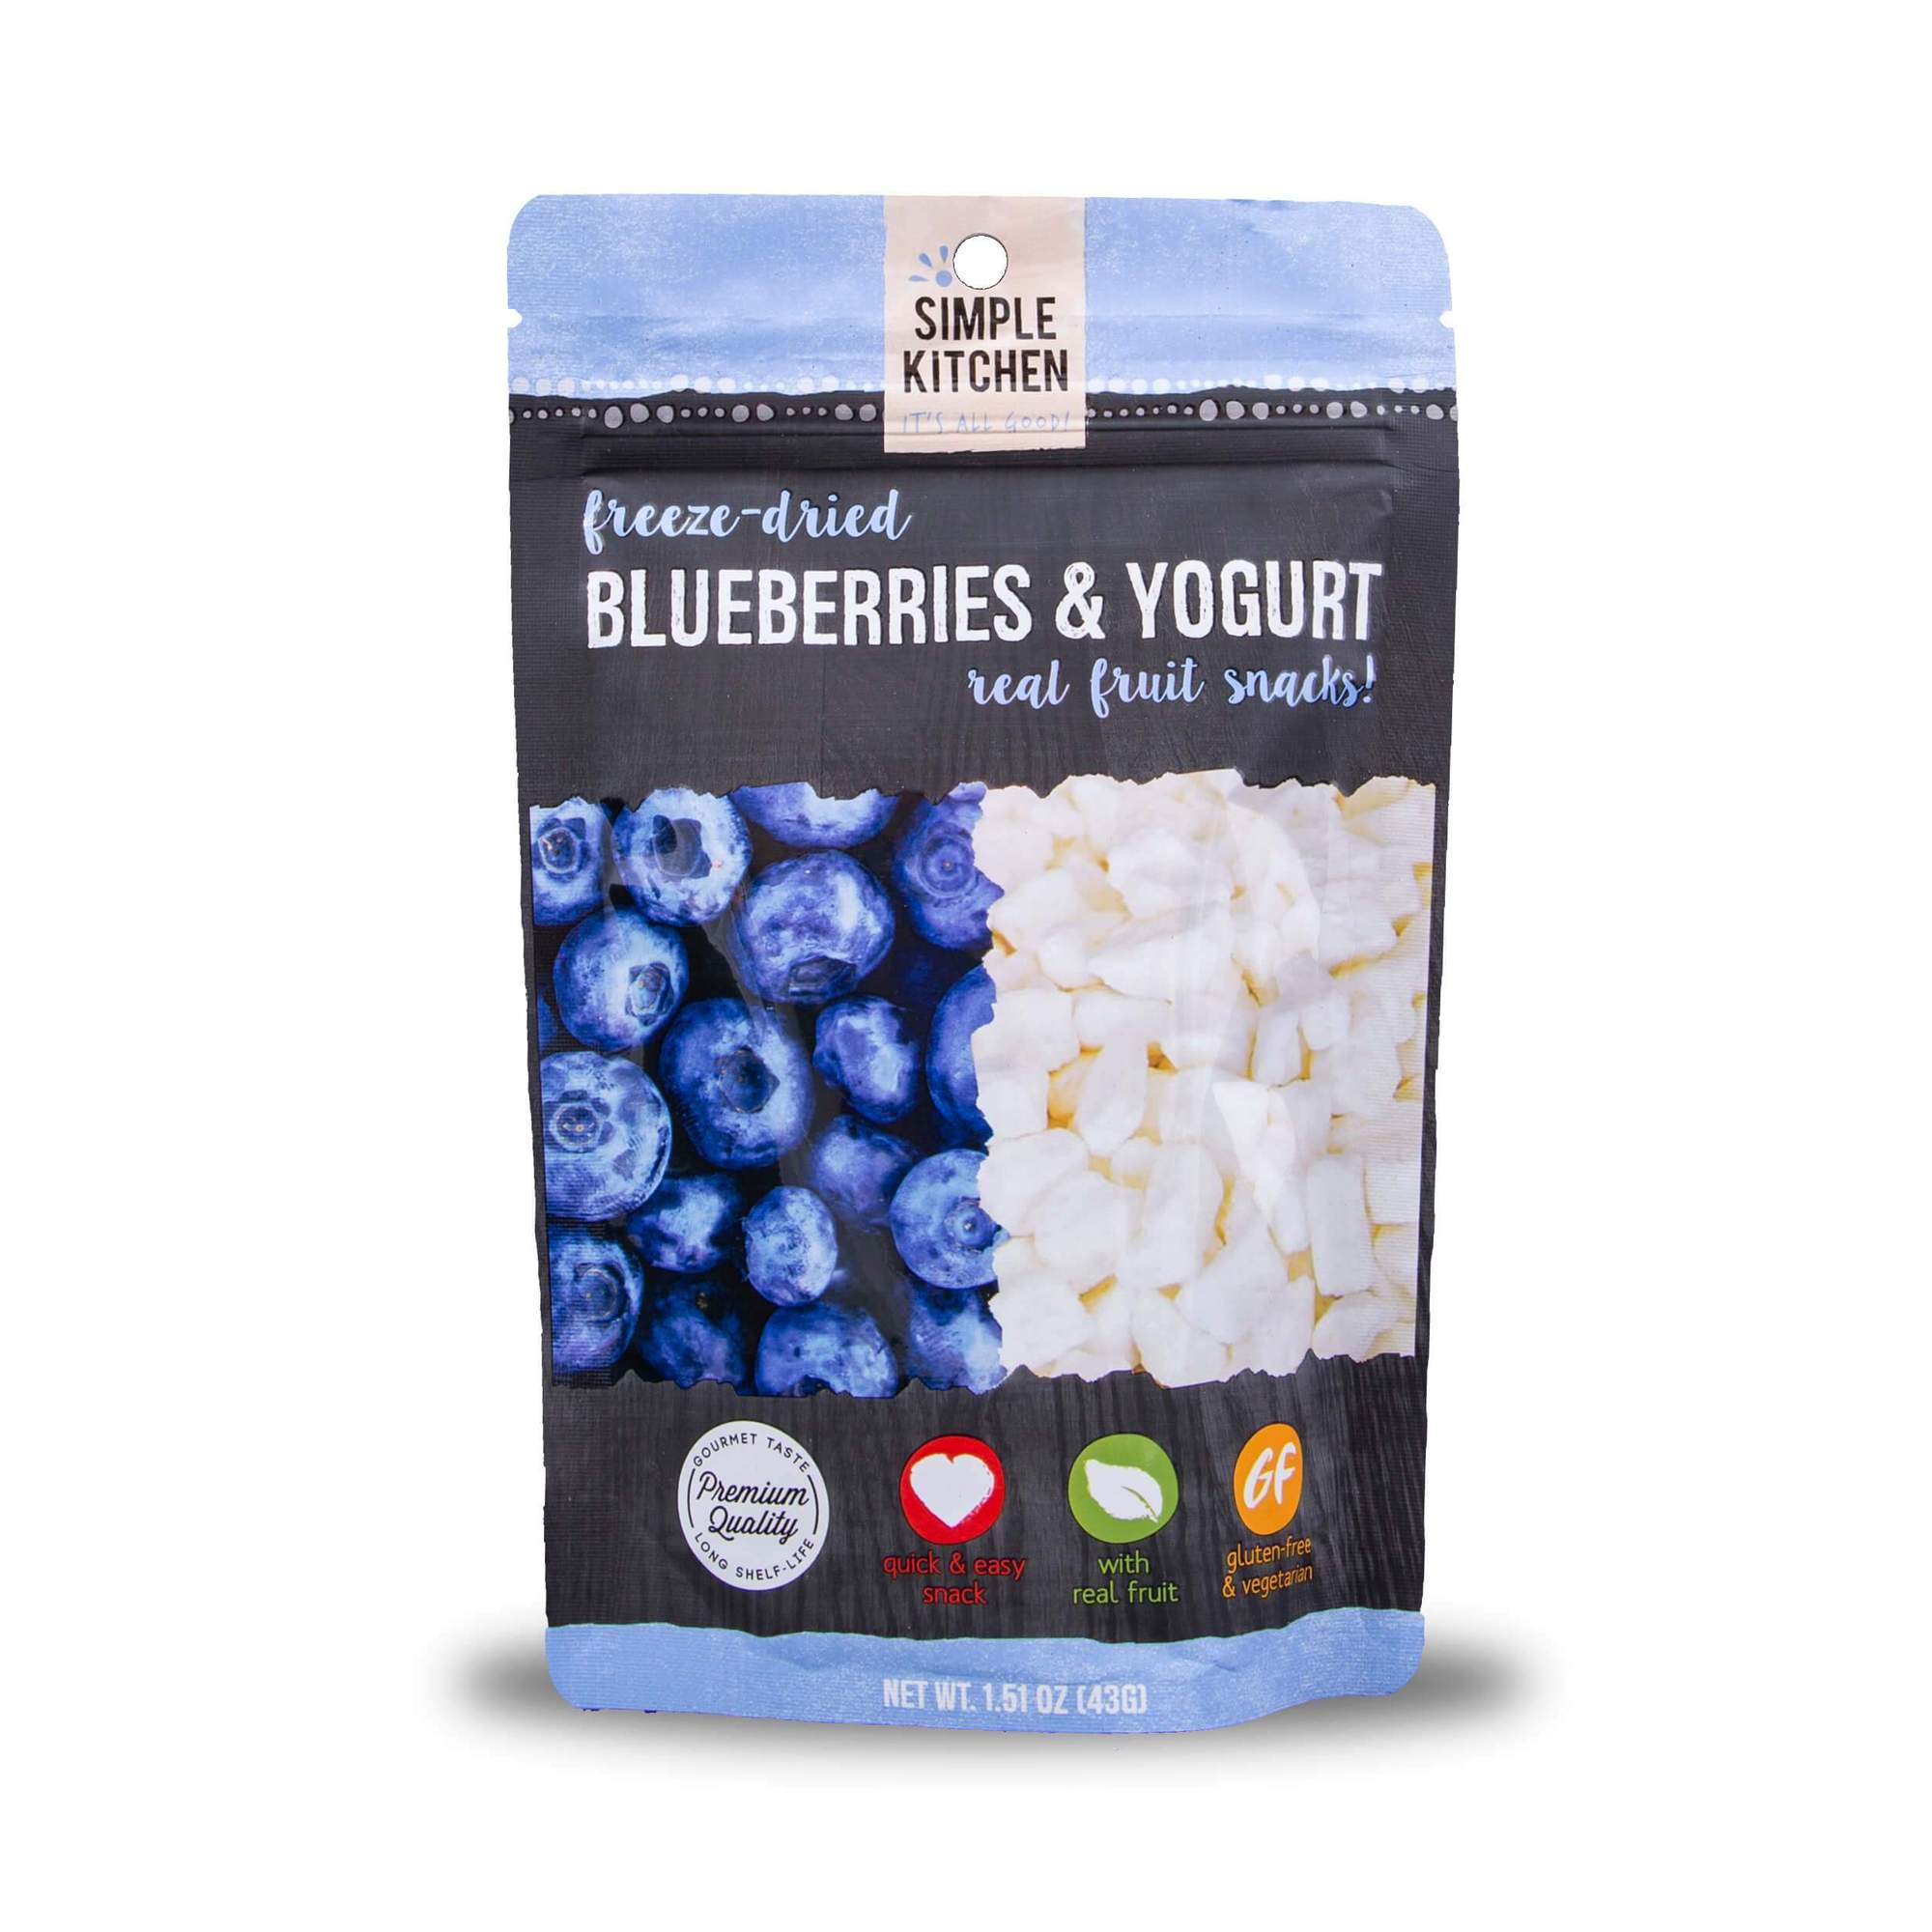 A ReadyWise (formerly Wise Food Storage) Freeze-Dried Blueberries and Yogurt - 6 Pack - (SHIPS IN 1-2 WEEKS).